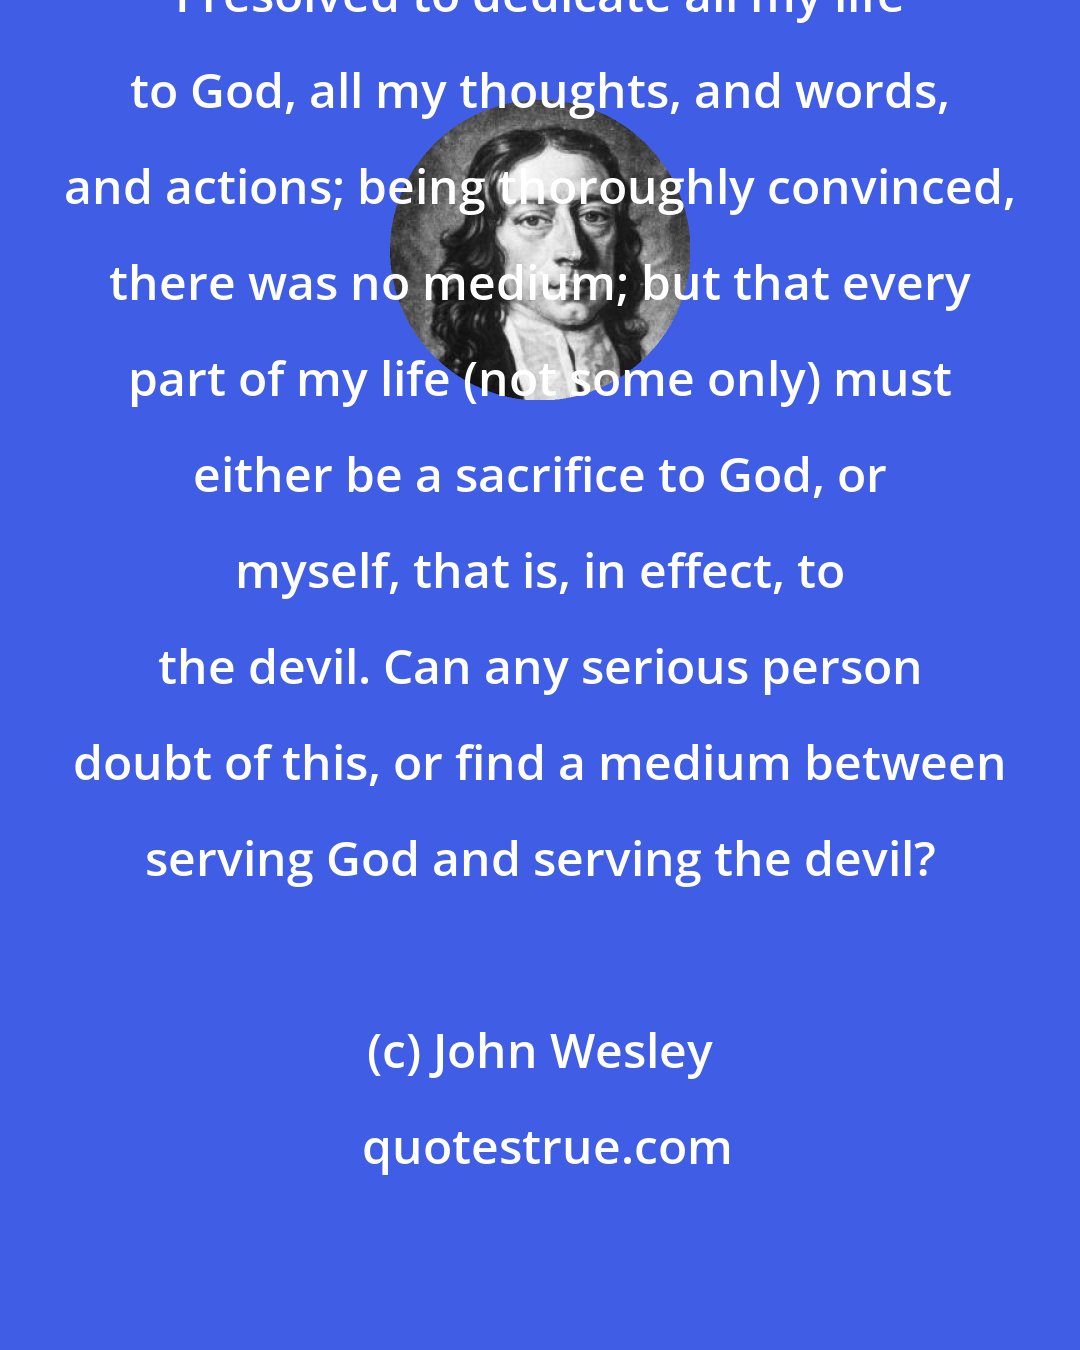 John Wesley: I resolved to dedicate all my life to God, all my thoughts, and words, and actions; being thoroughly convinced, there was no medium; but that every part of my life (not some only) must either be a sacrifice to God, or myself, that is, in effect, to the devil. Can any serious person doubt of this, or find a medium between serving God and serving the devil?